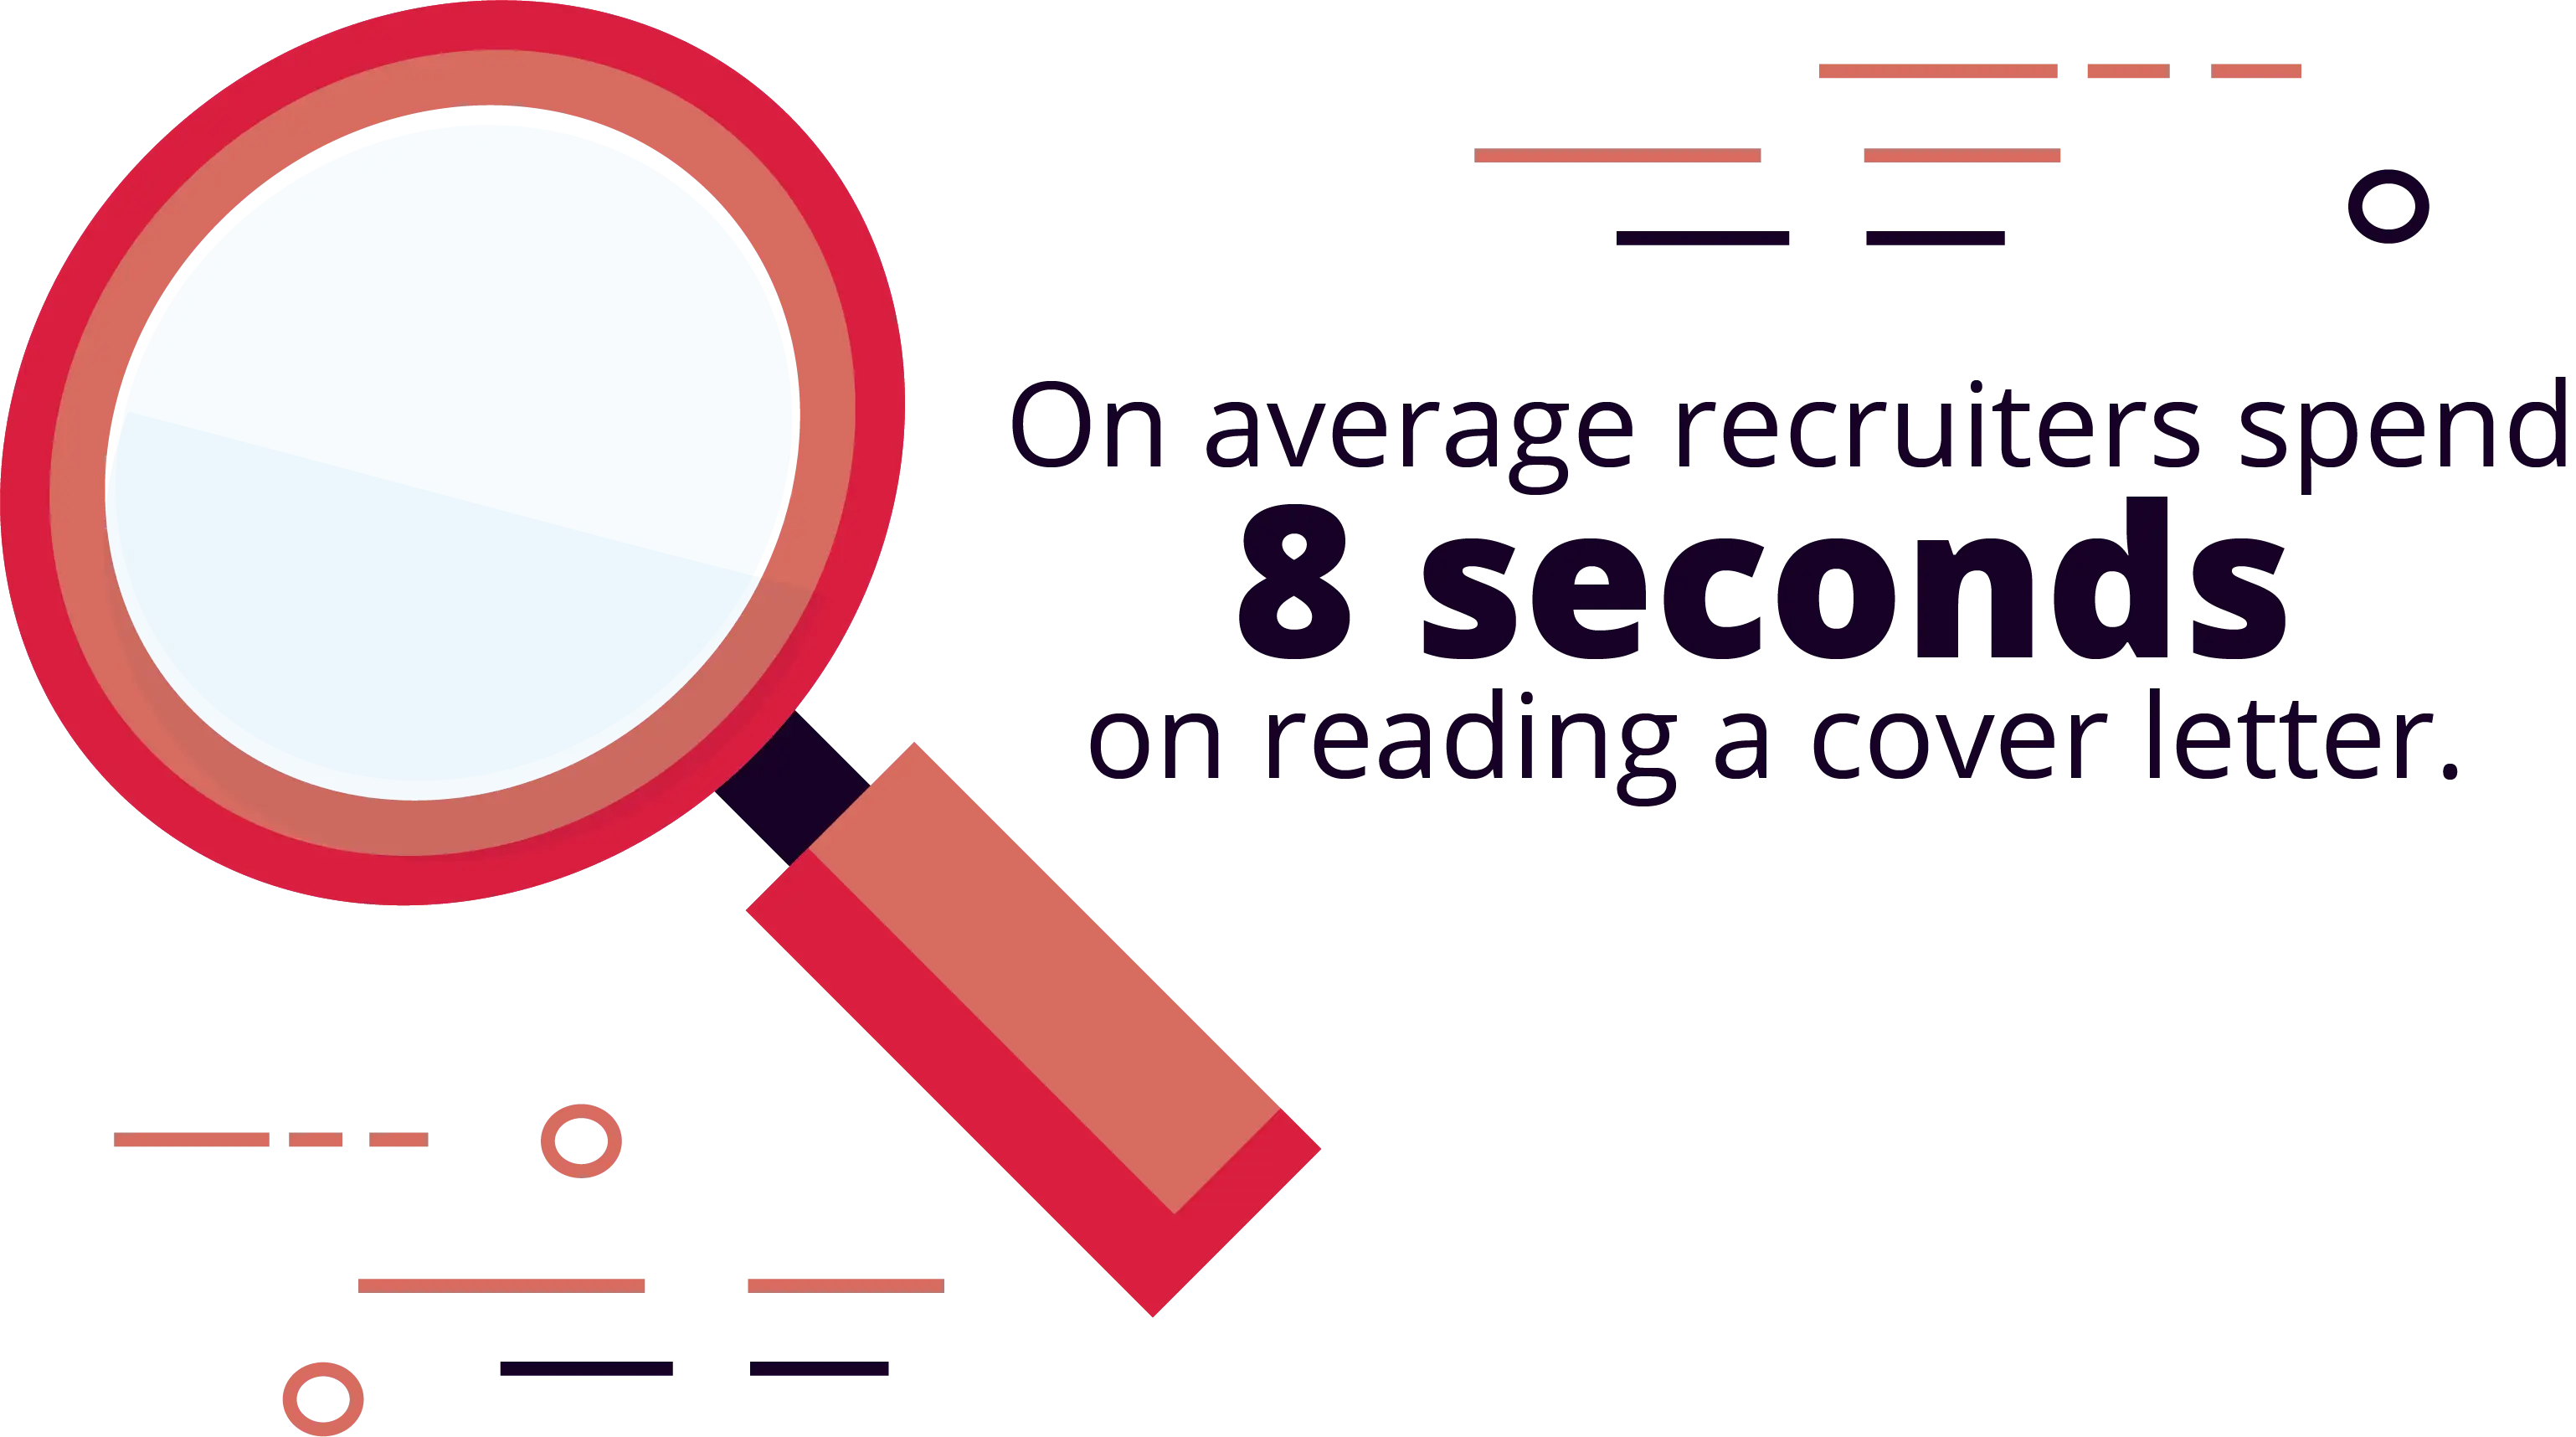 Recruiters Spend an Average of 8 Seconds Reading Cover Letters